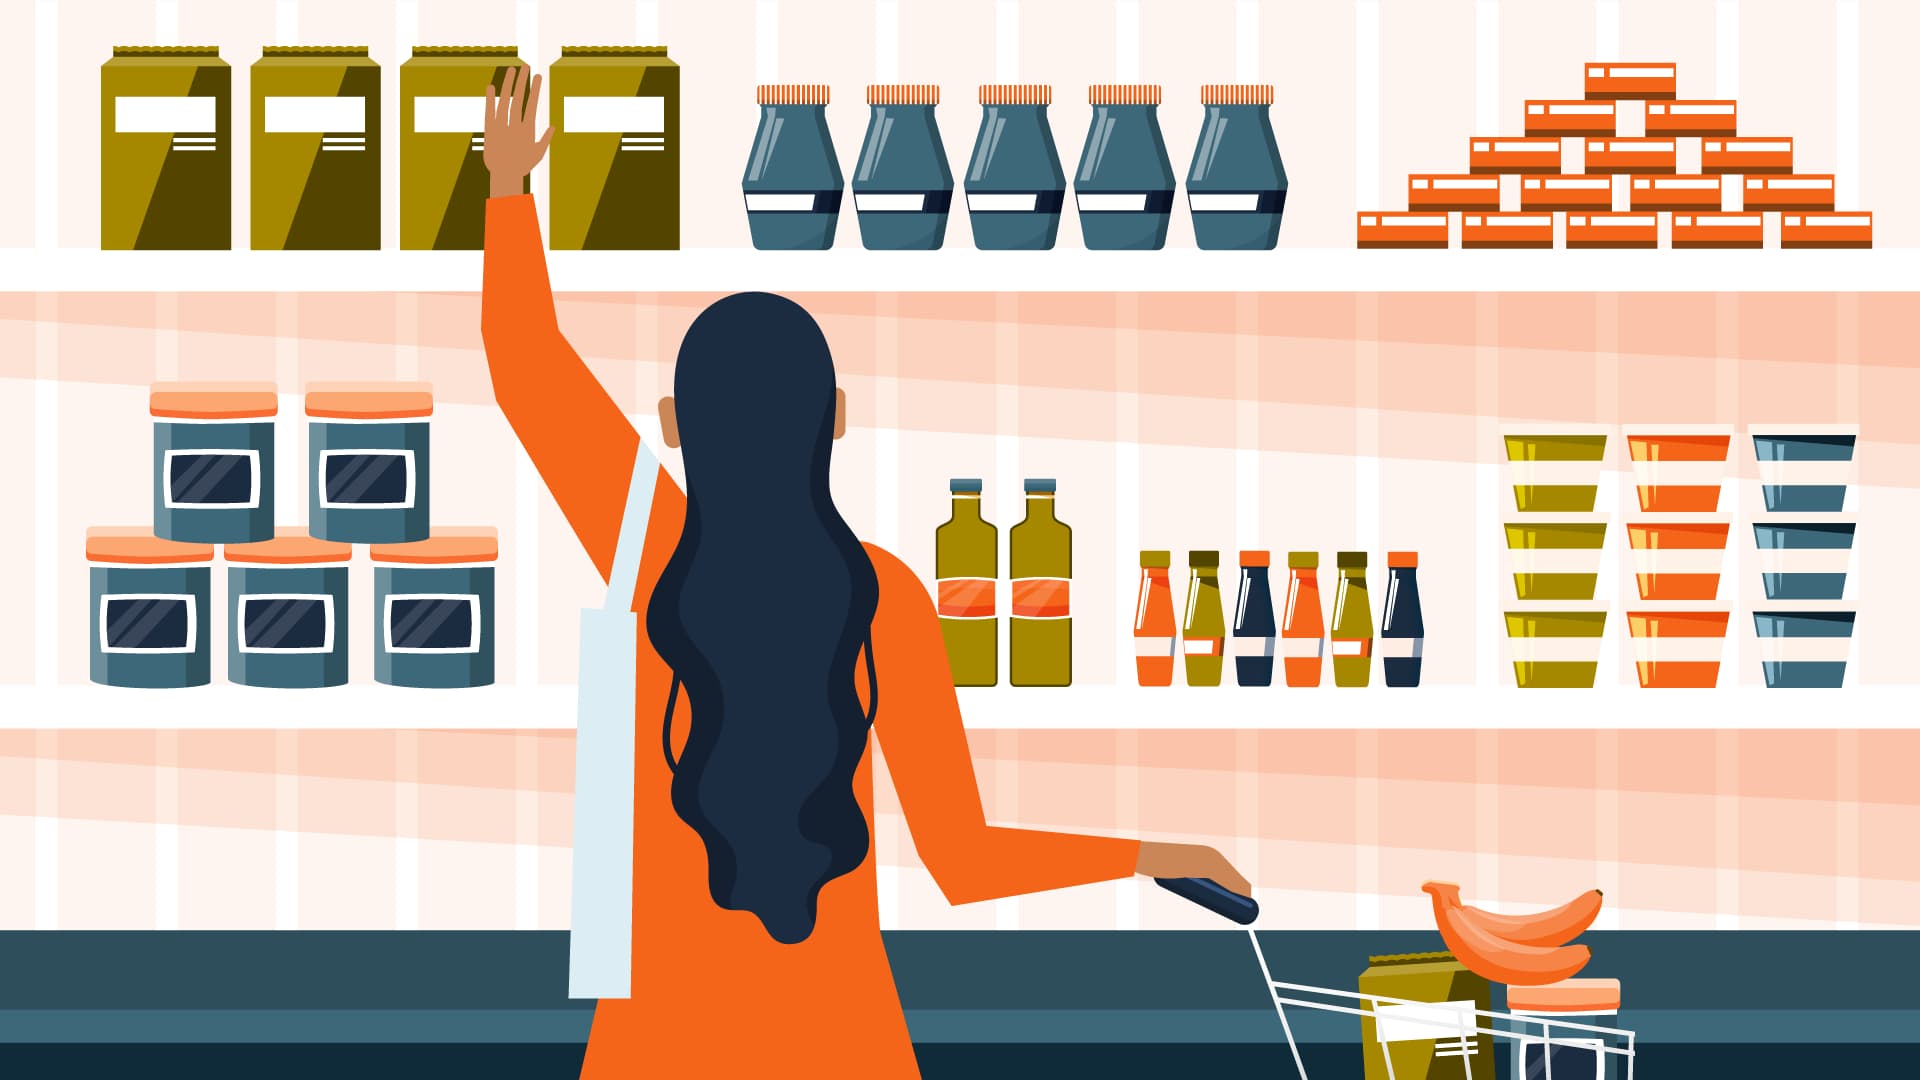 Illustration of woman reaching for food on a store shelf